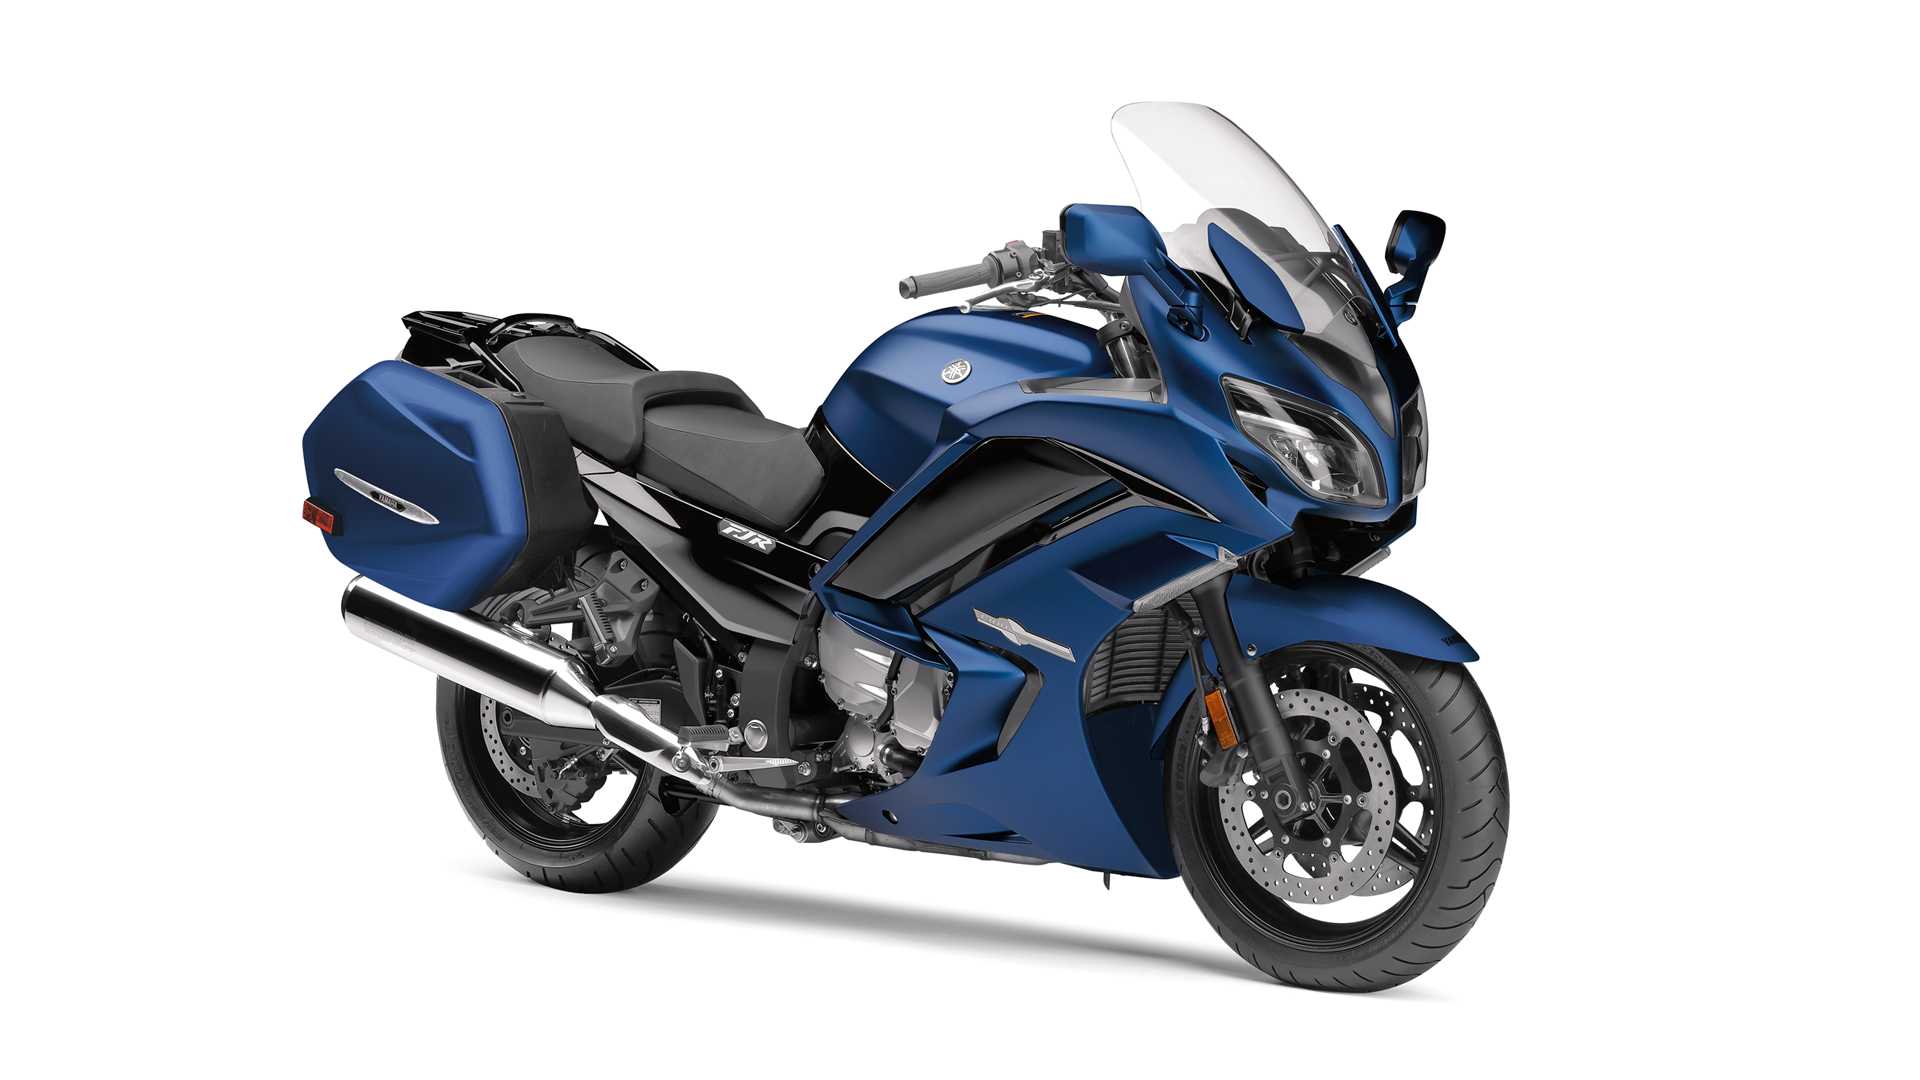 Recall: Yamaha Recommends You Leave Your FJR1300